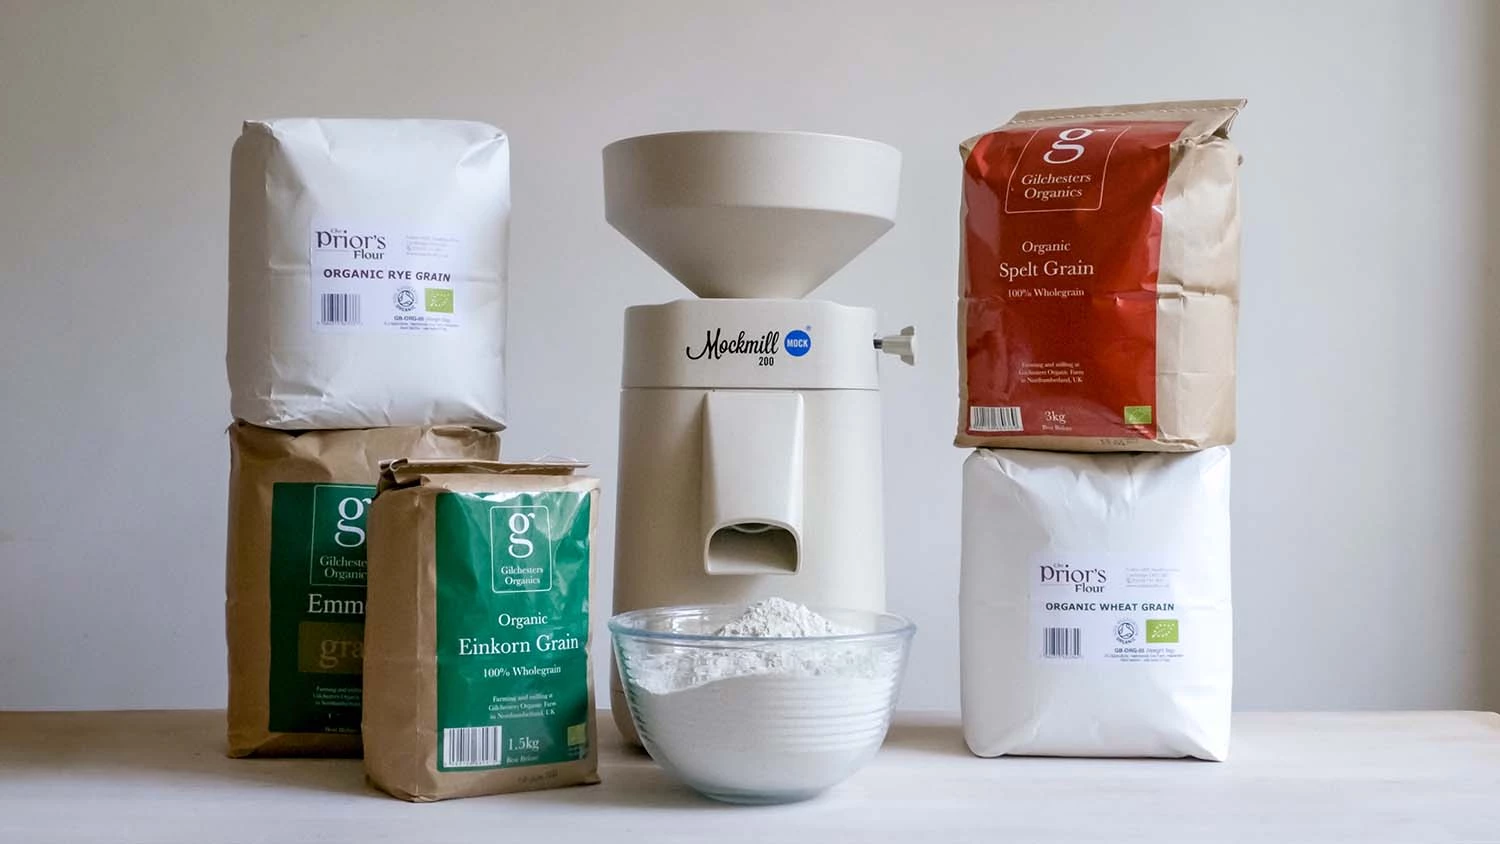 Home Flour Milling With Your Mockmill Flour Mill